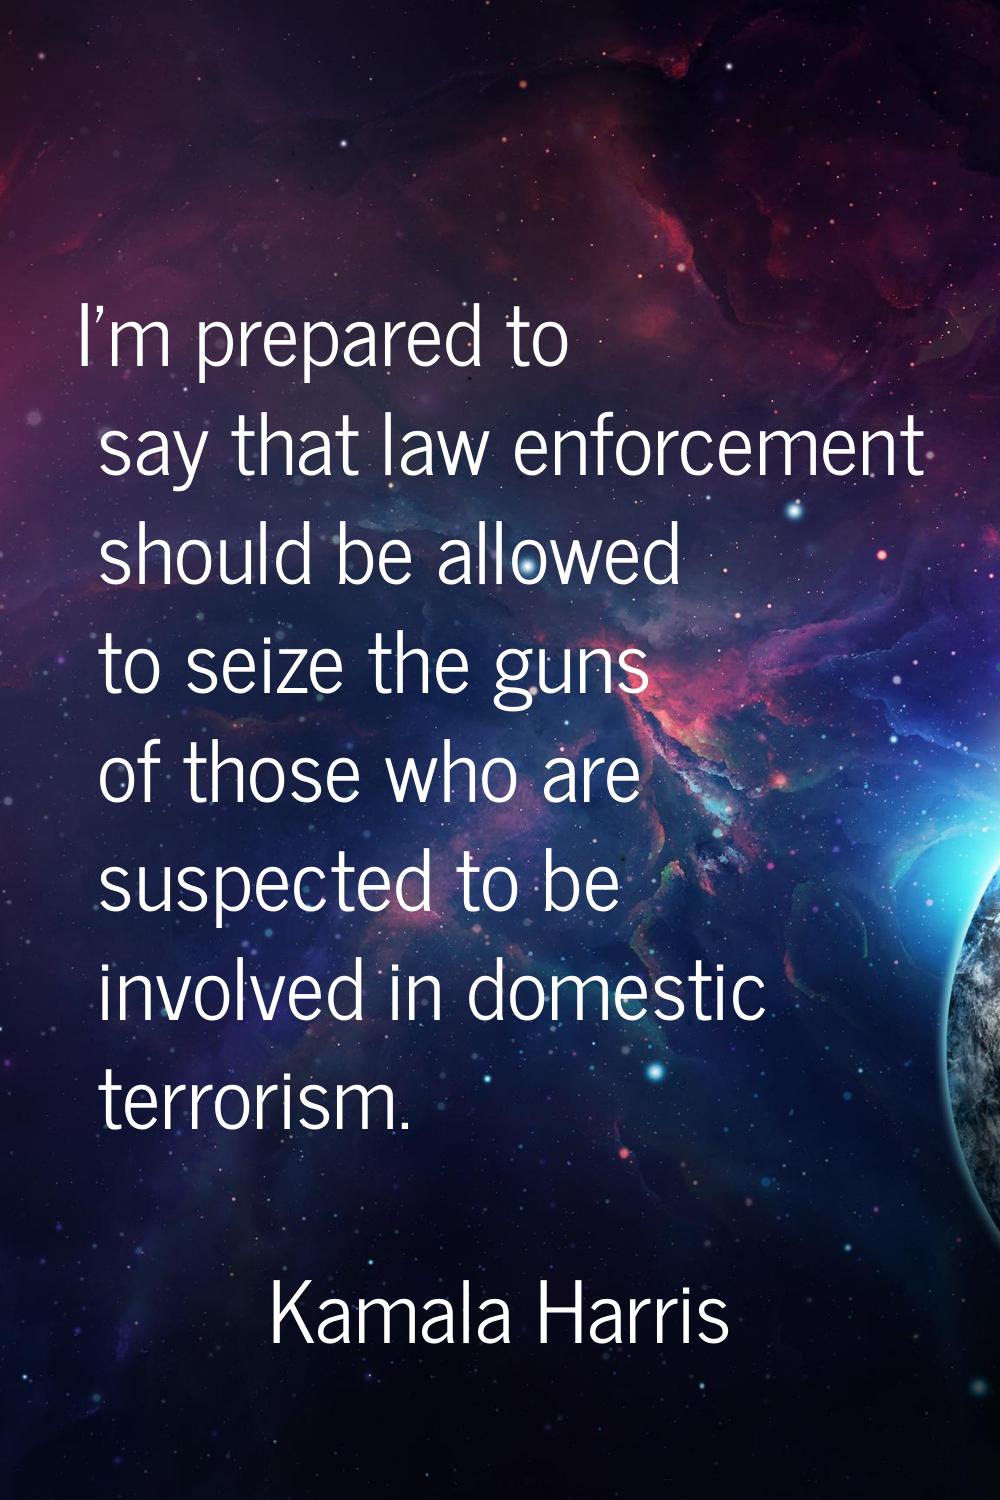 I'm prepared to say that law enforcement should be allowed to seize the guns of those who are suspe